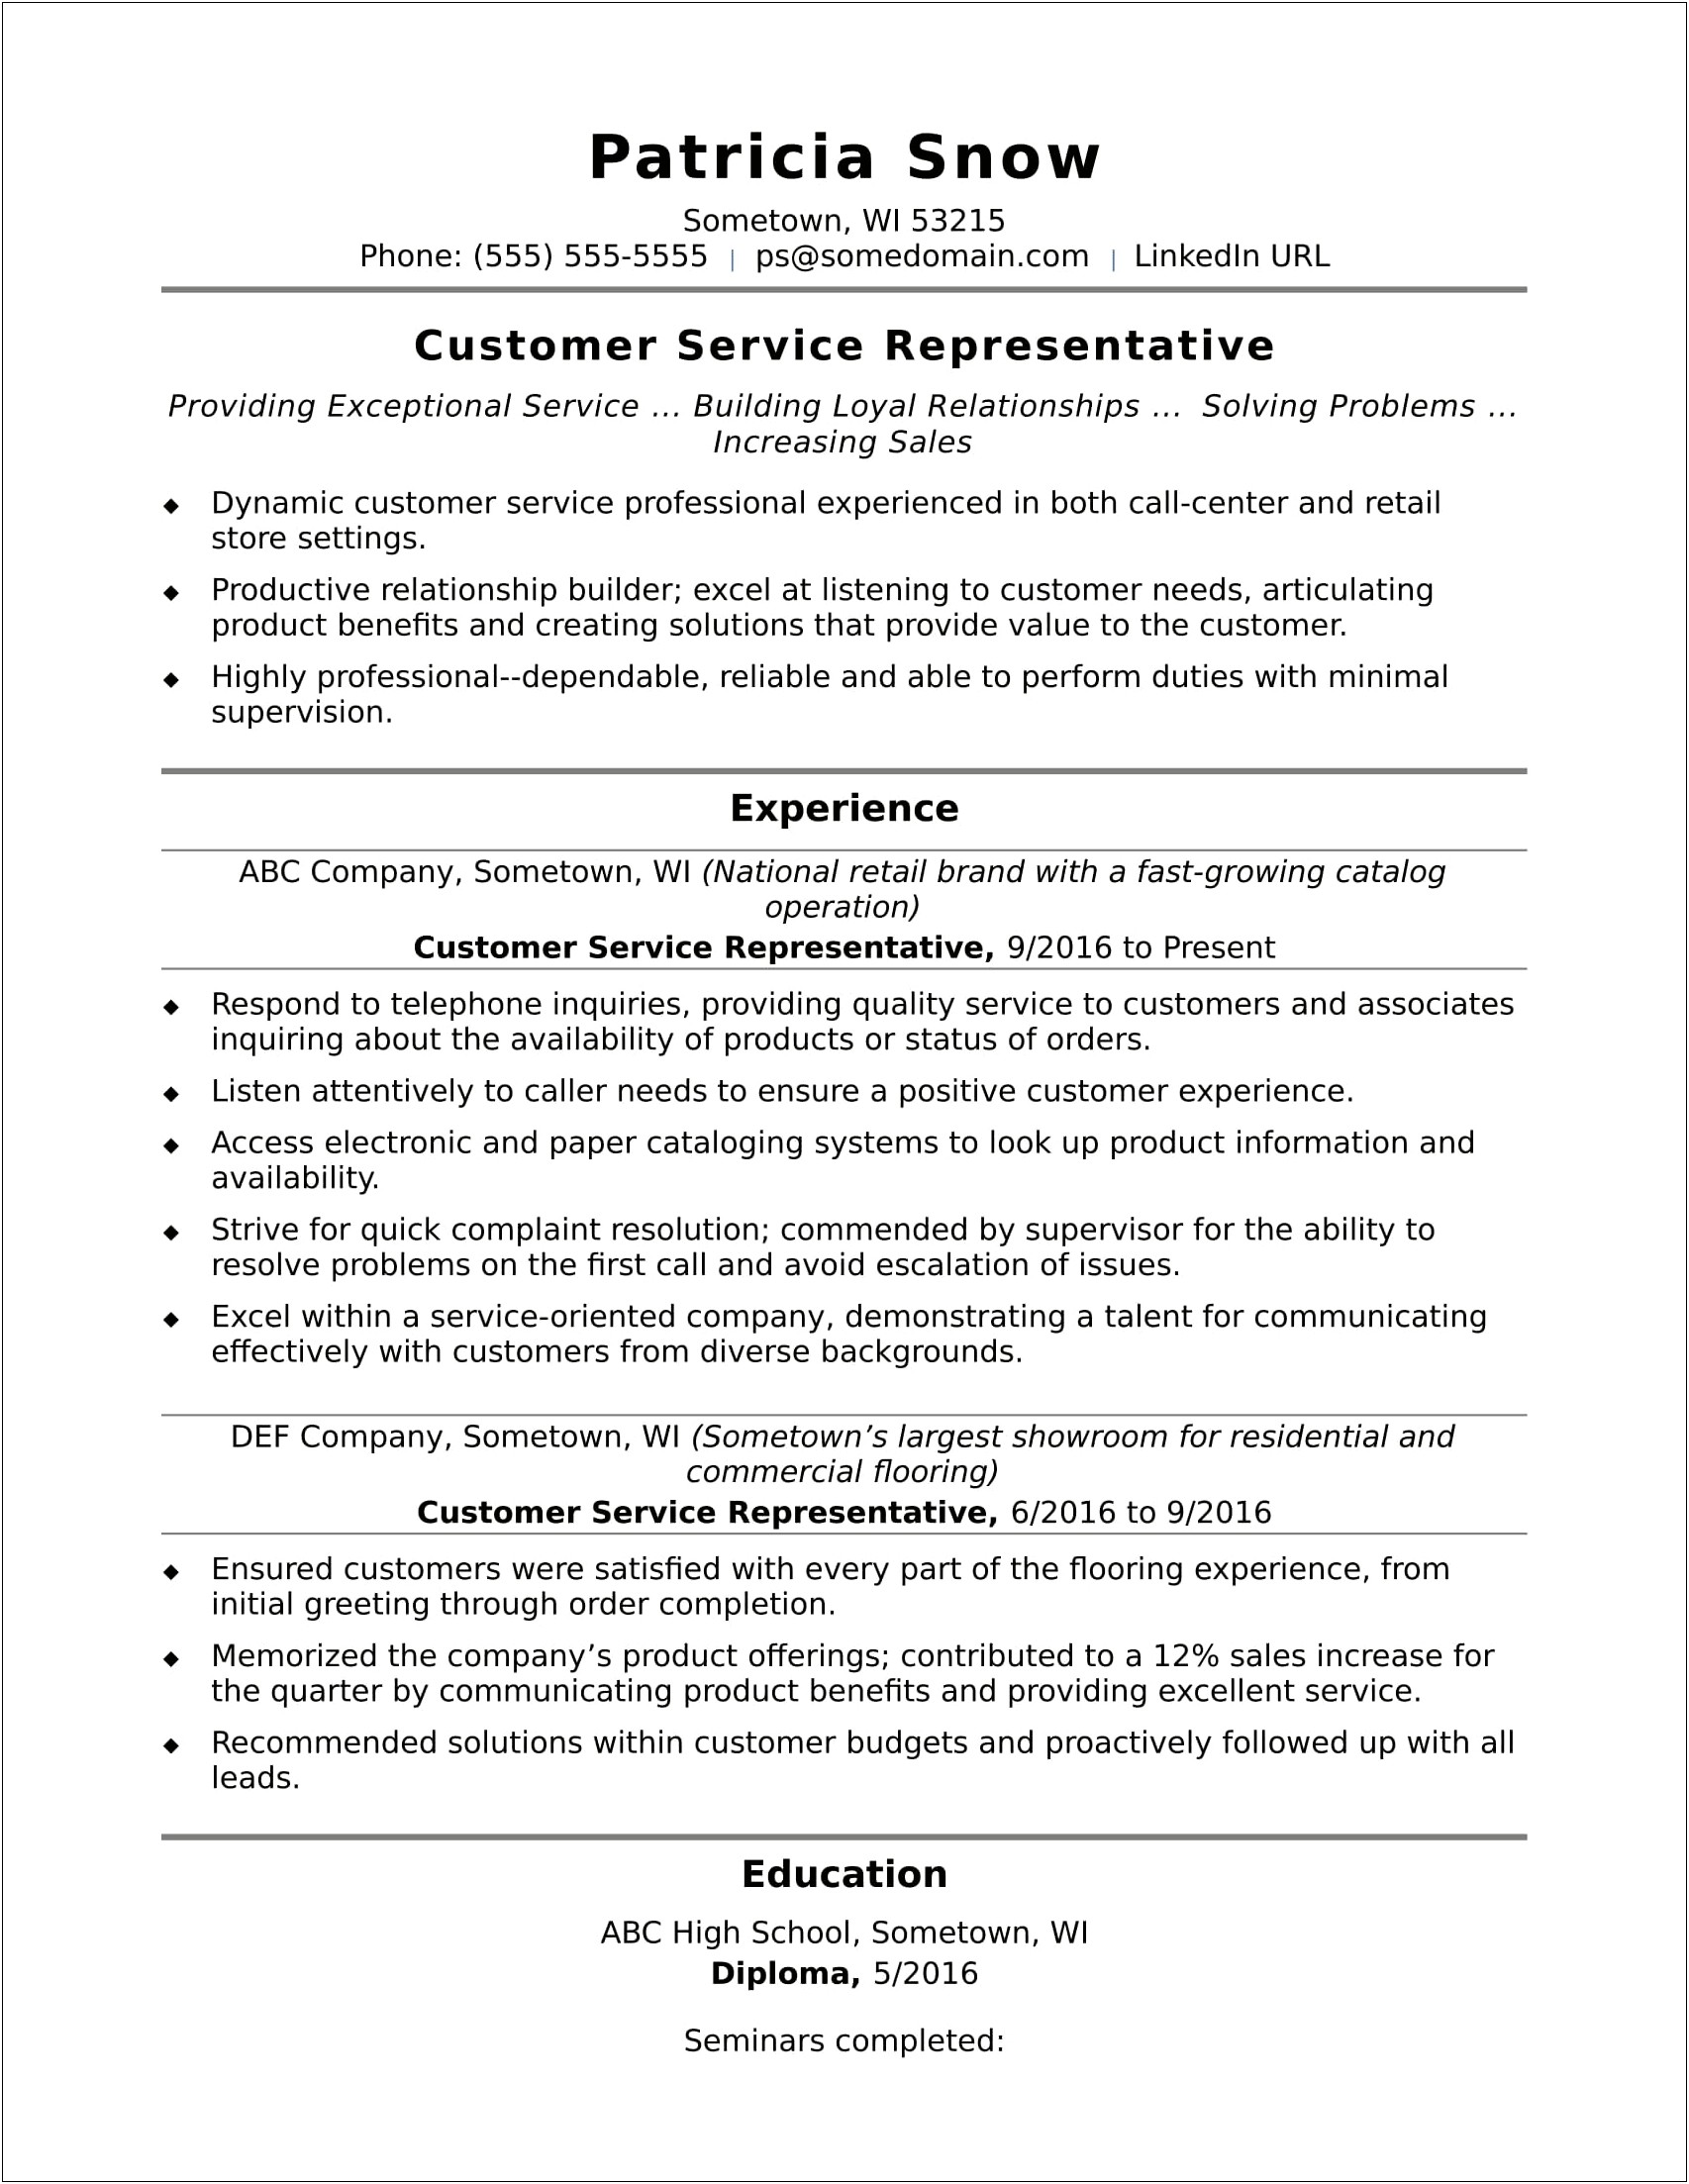 Cell Phone Sales Rep Resume Sample